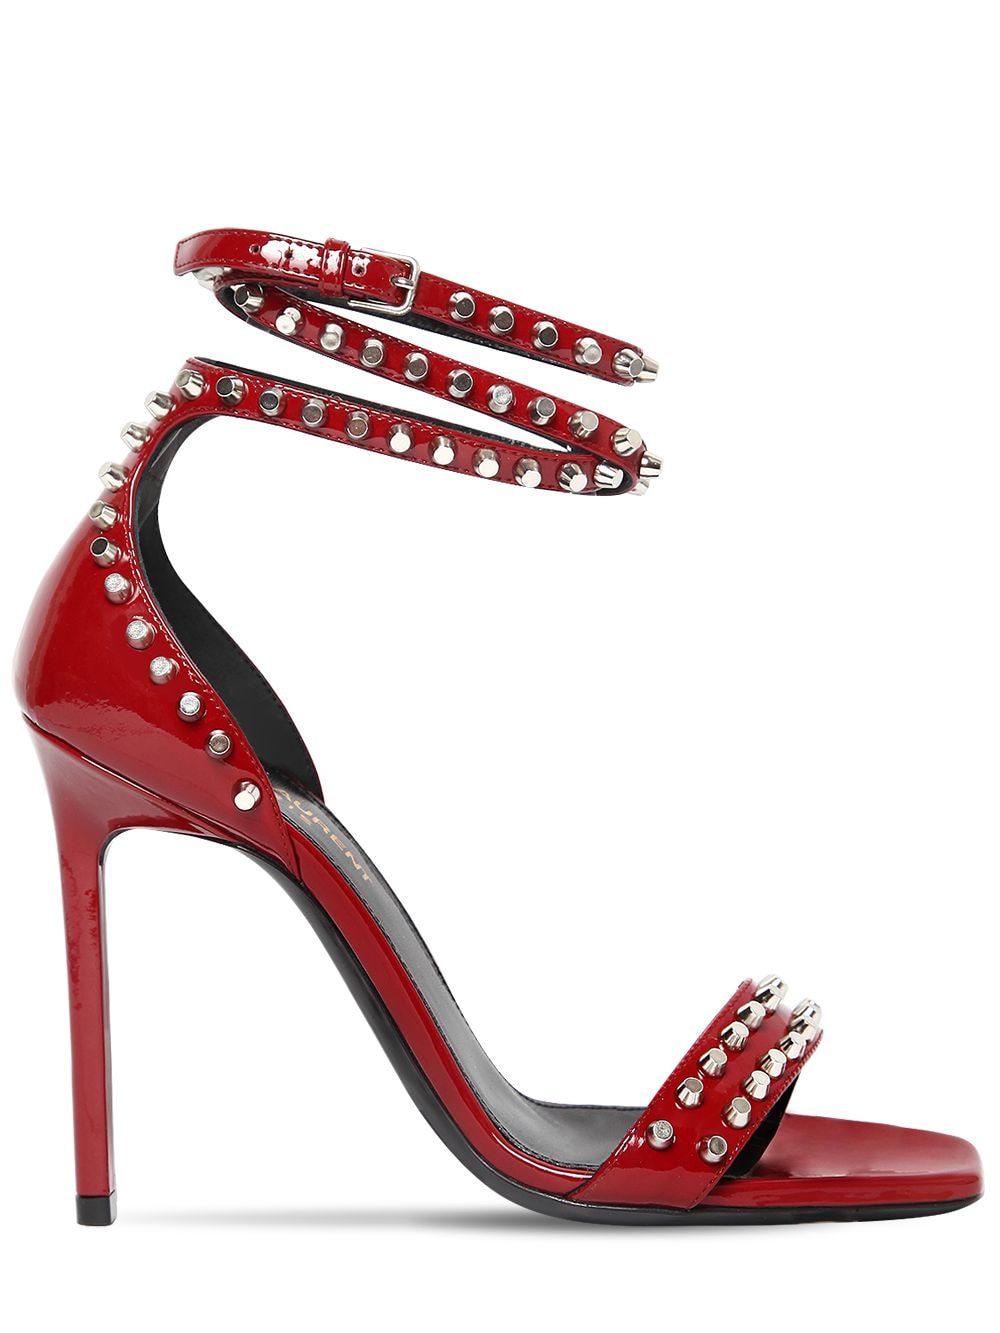 Saint Laurent 105mm Amber Studs Patent Leather Sandals In Red